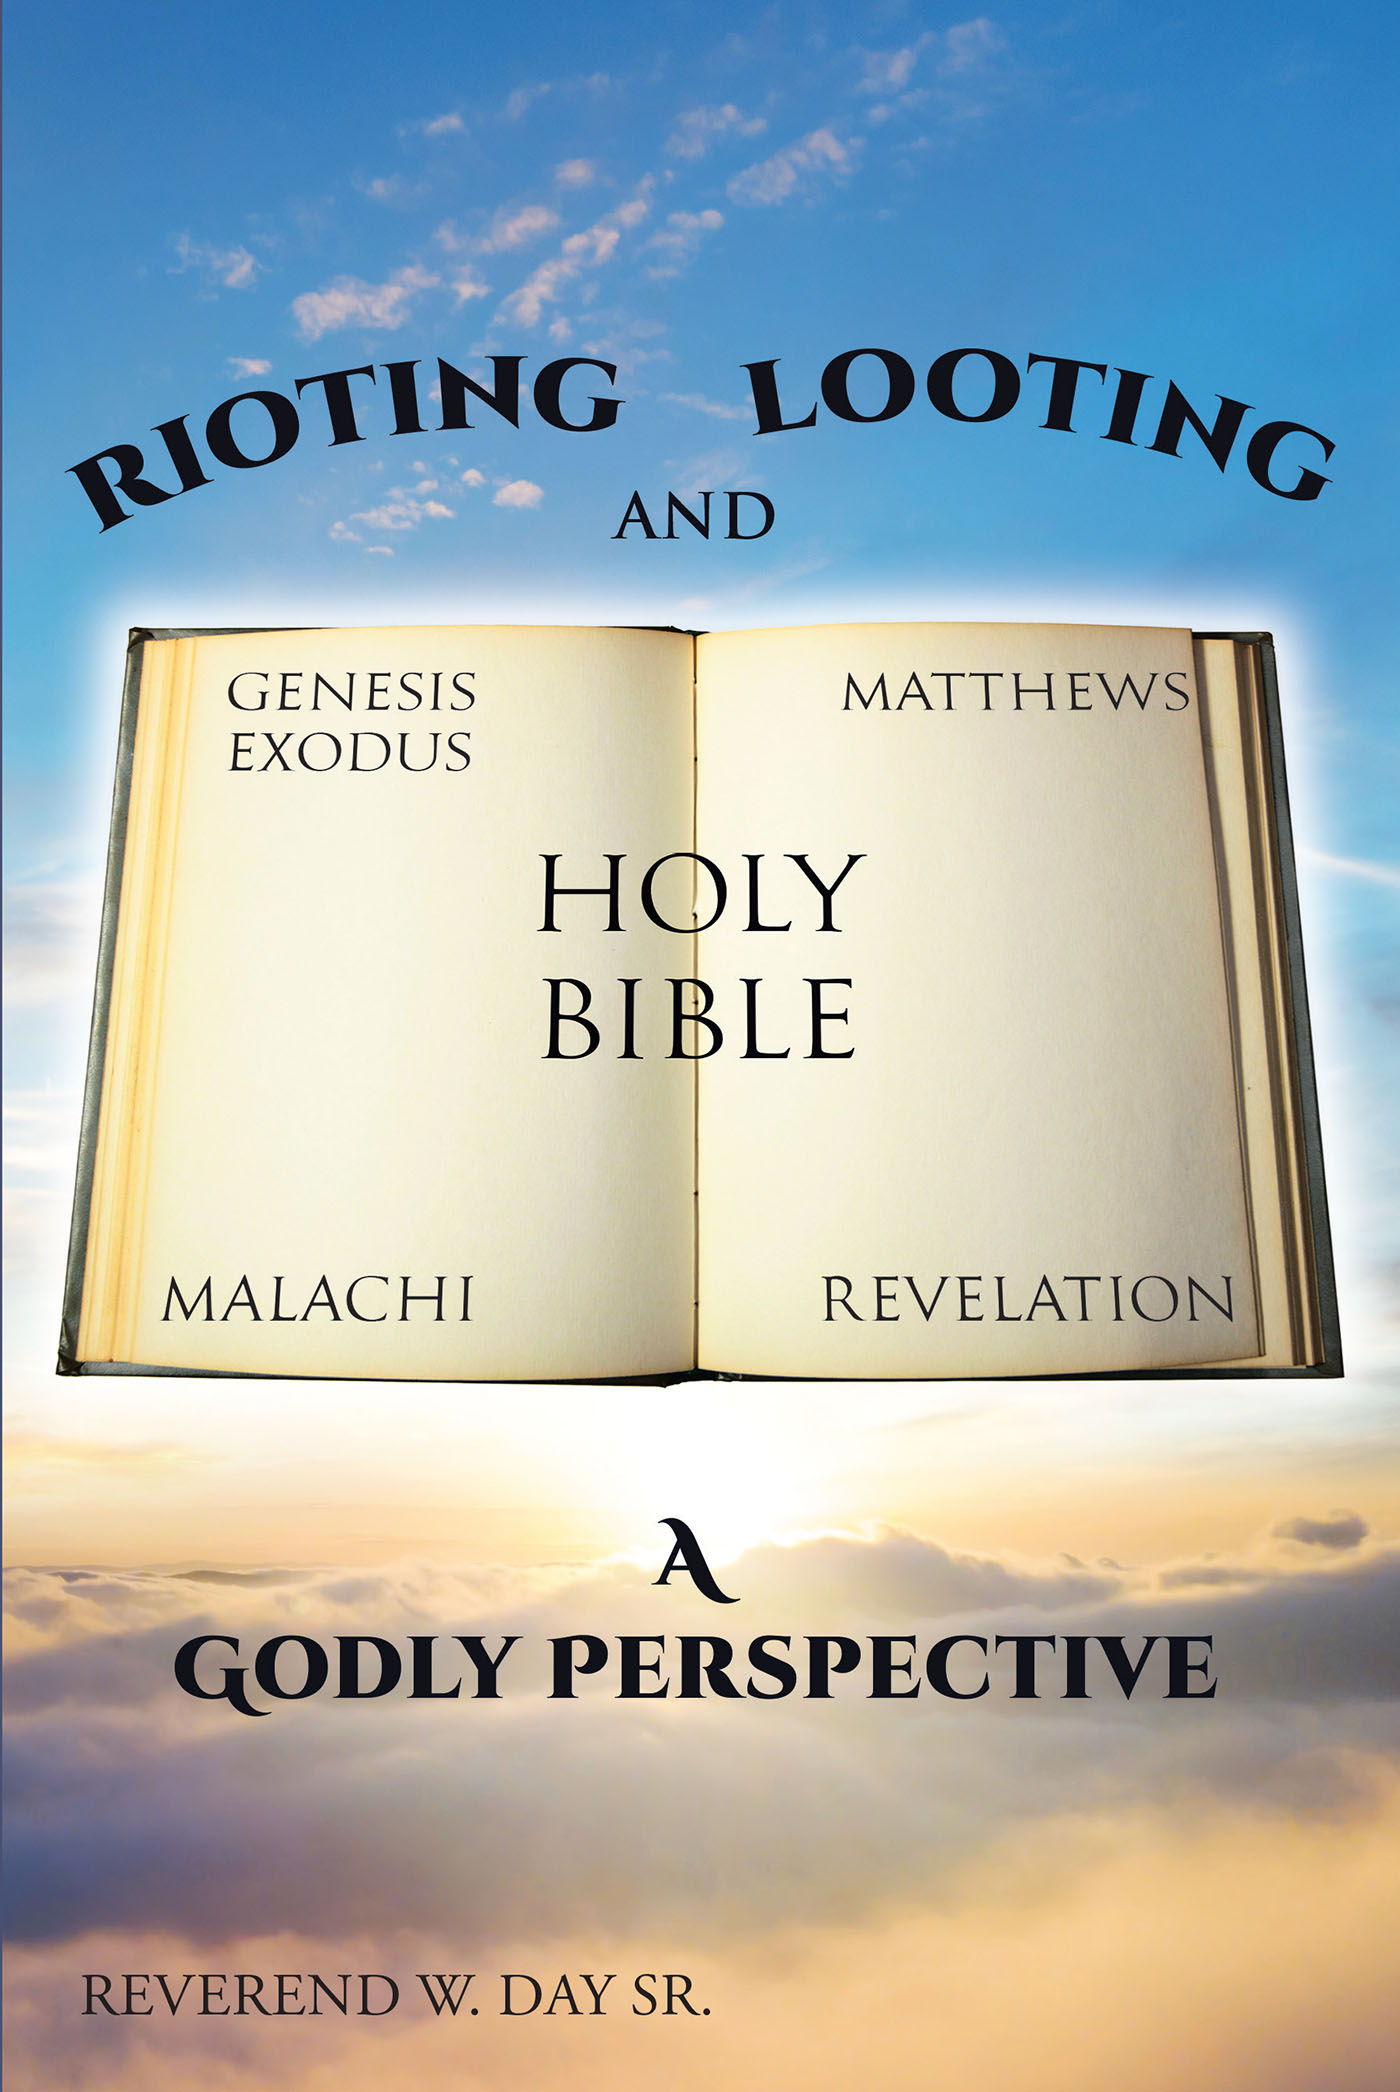 Author Reverend W. Day Sr.’s Newly Released "Rioting and Looting: A Godly Perspective" Discusses the Author's and Biblical Views on Violent Protest Against Injustice